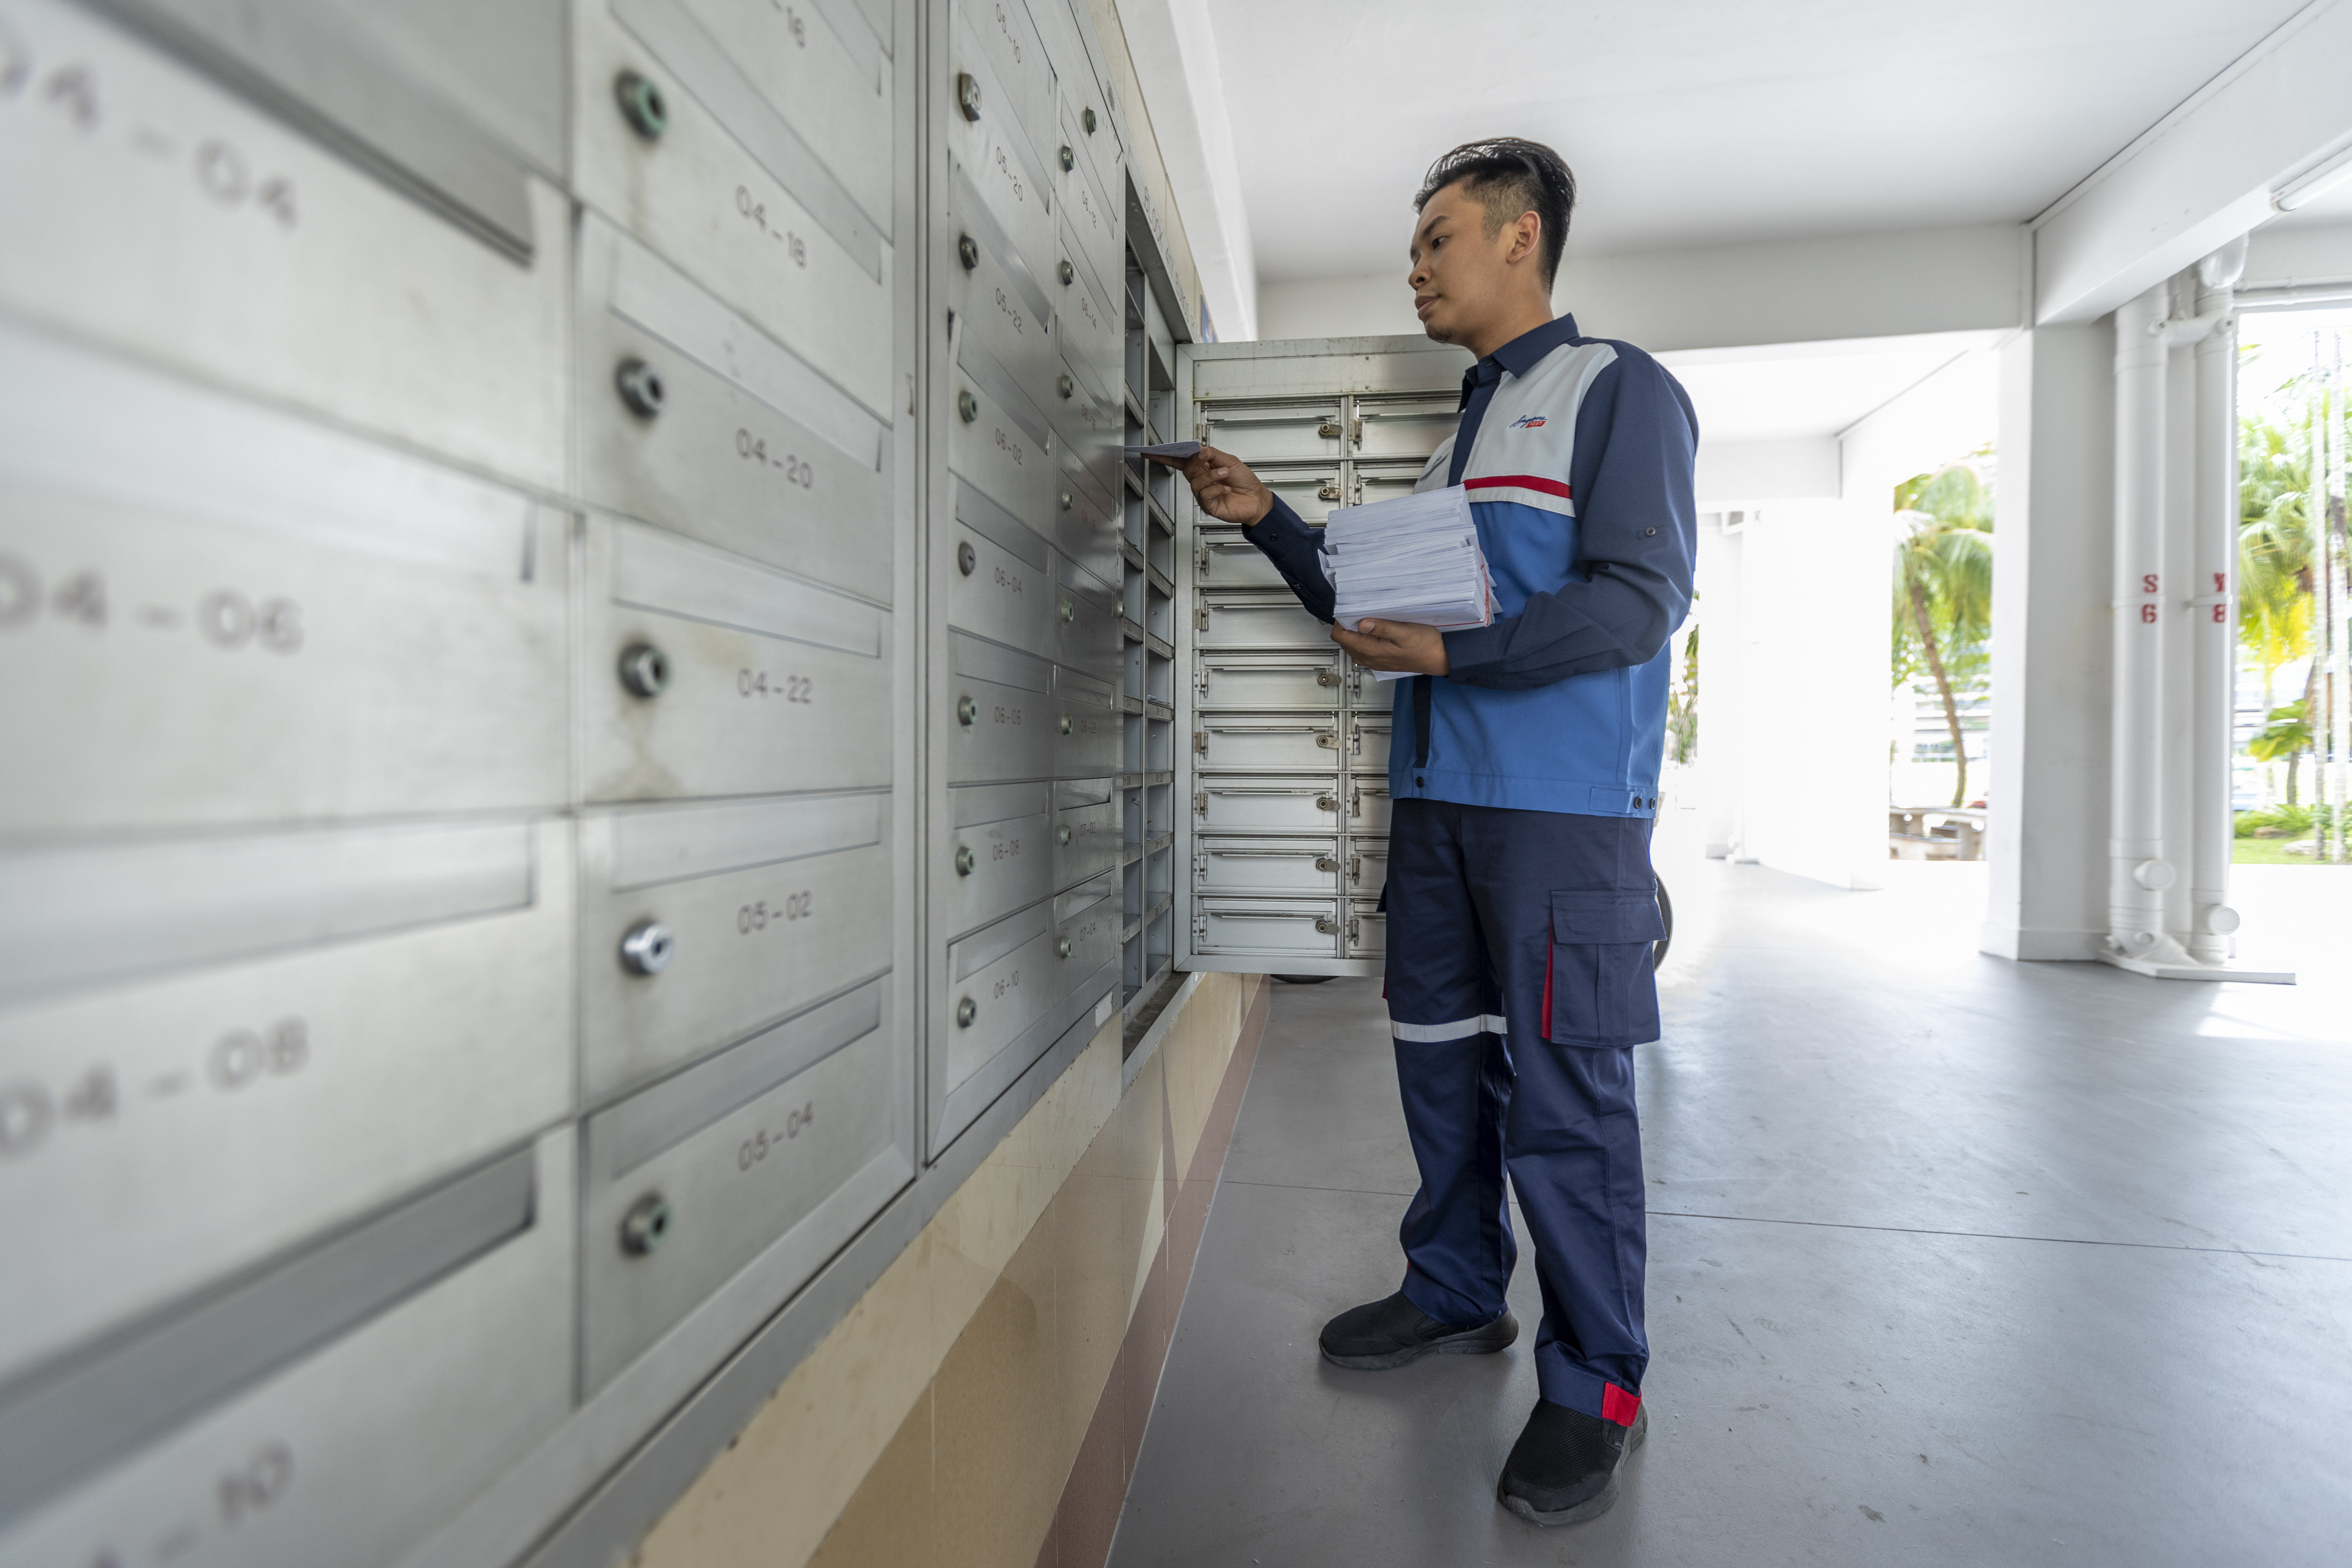 Postage Rates to Increase Amid Rapidly Rising Costs and  Declining Mail Volumes 